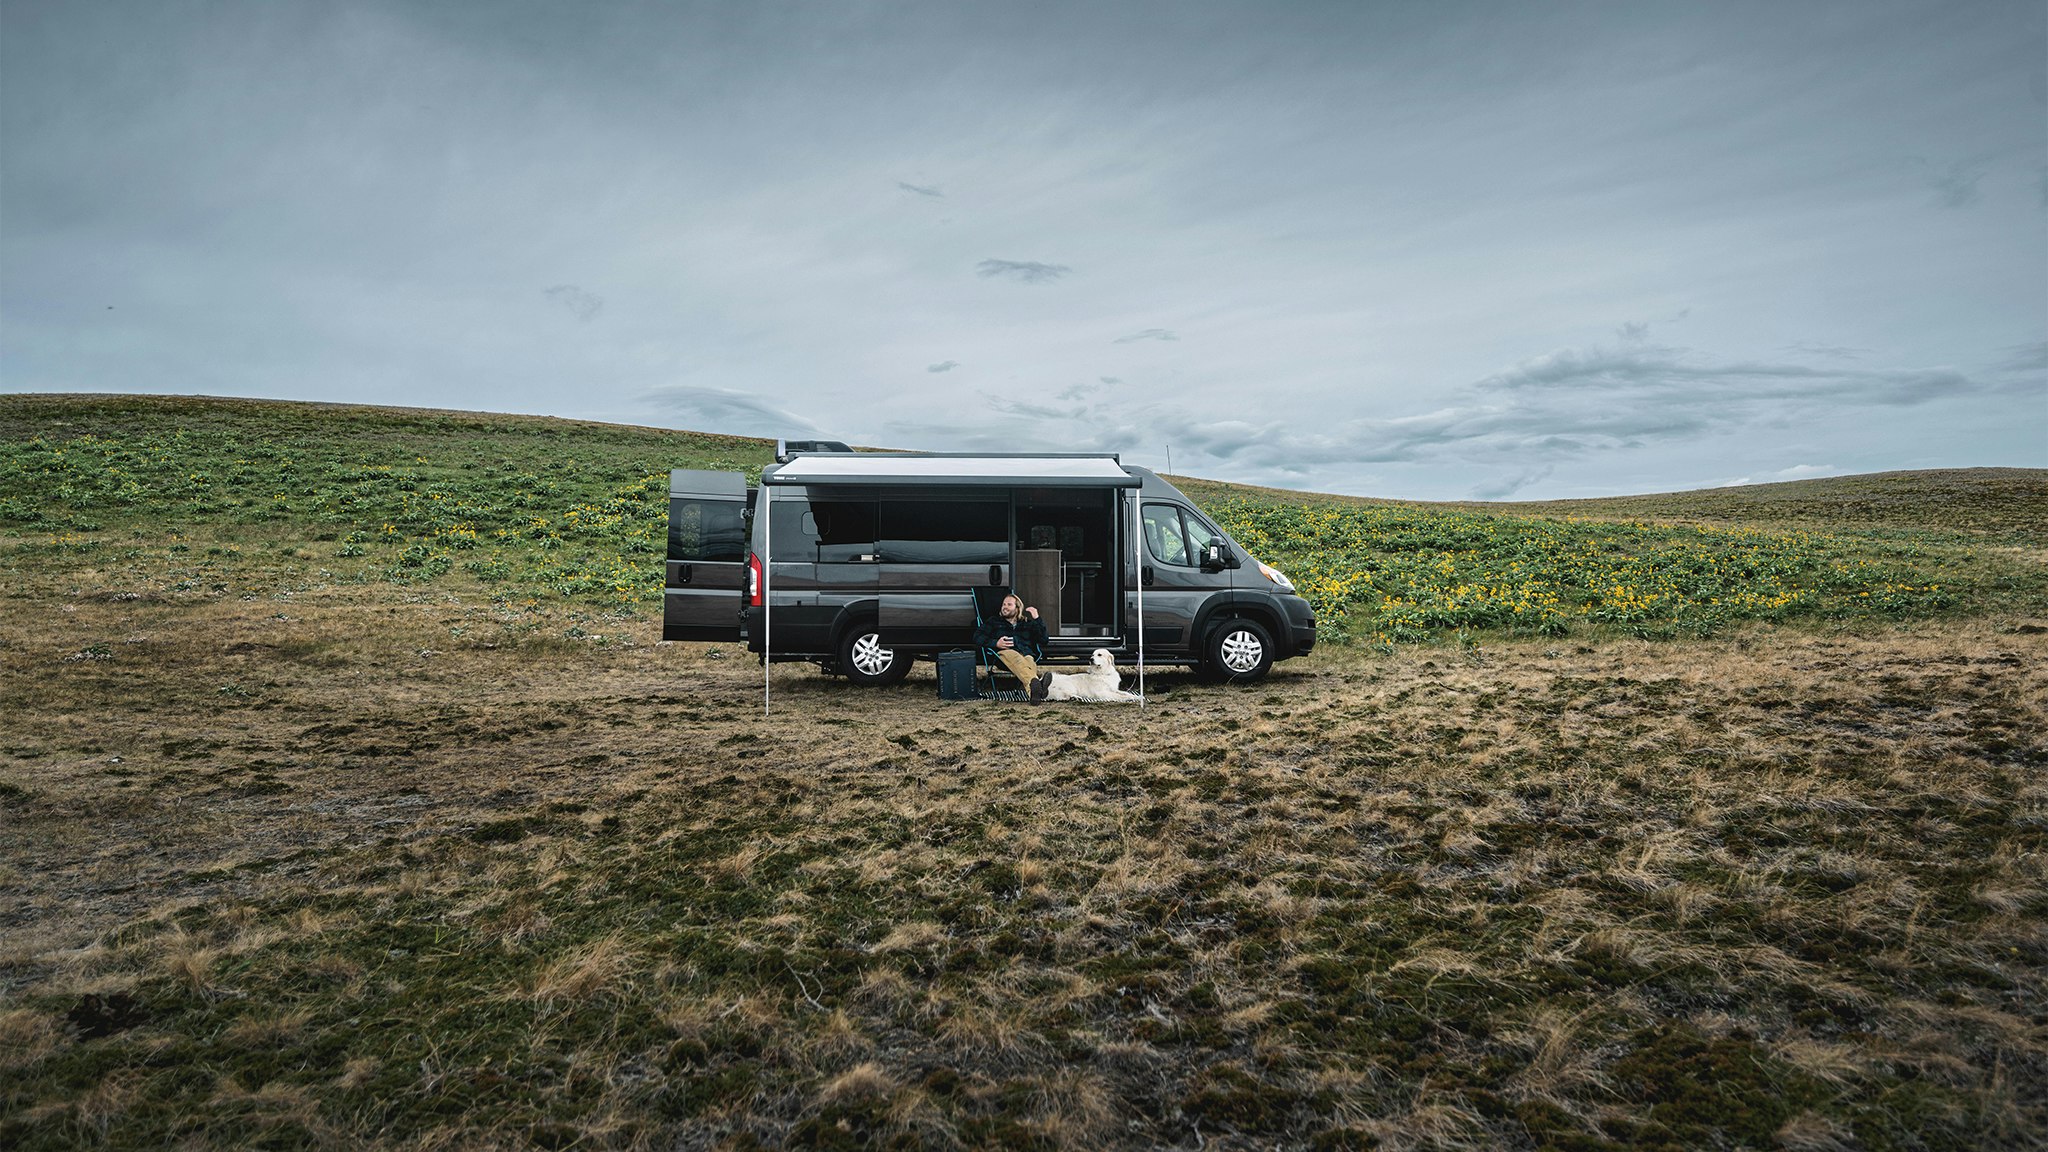 7 Game-Changing Features of the Airstream Rangeline Touring Coach